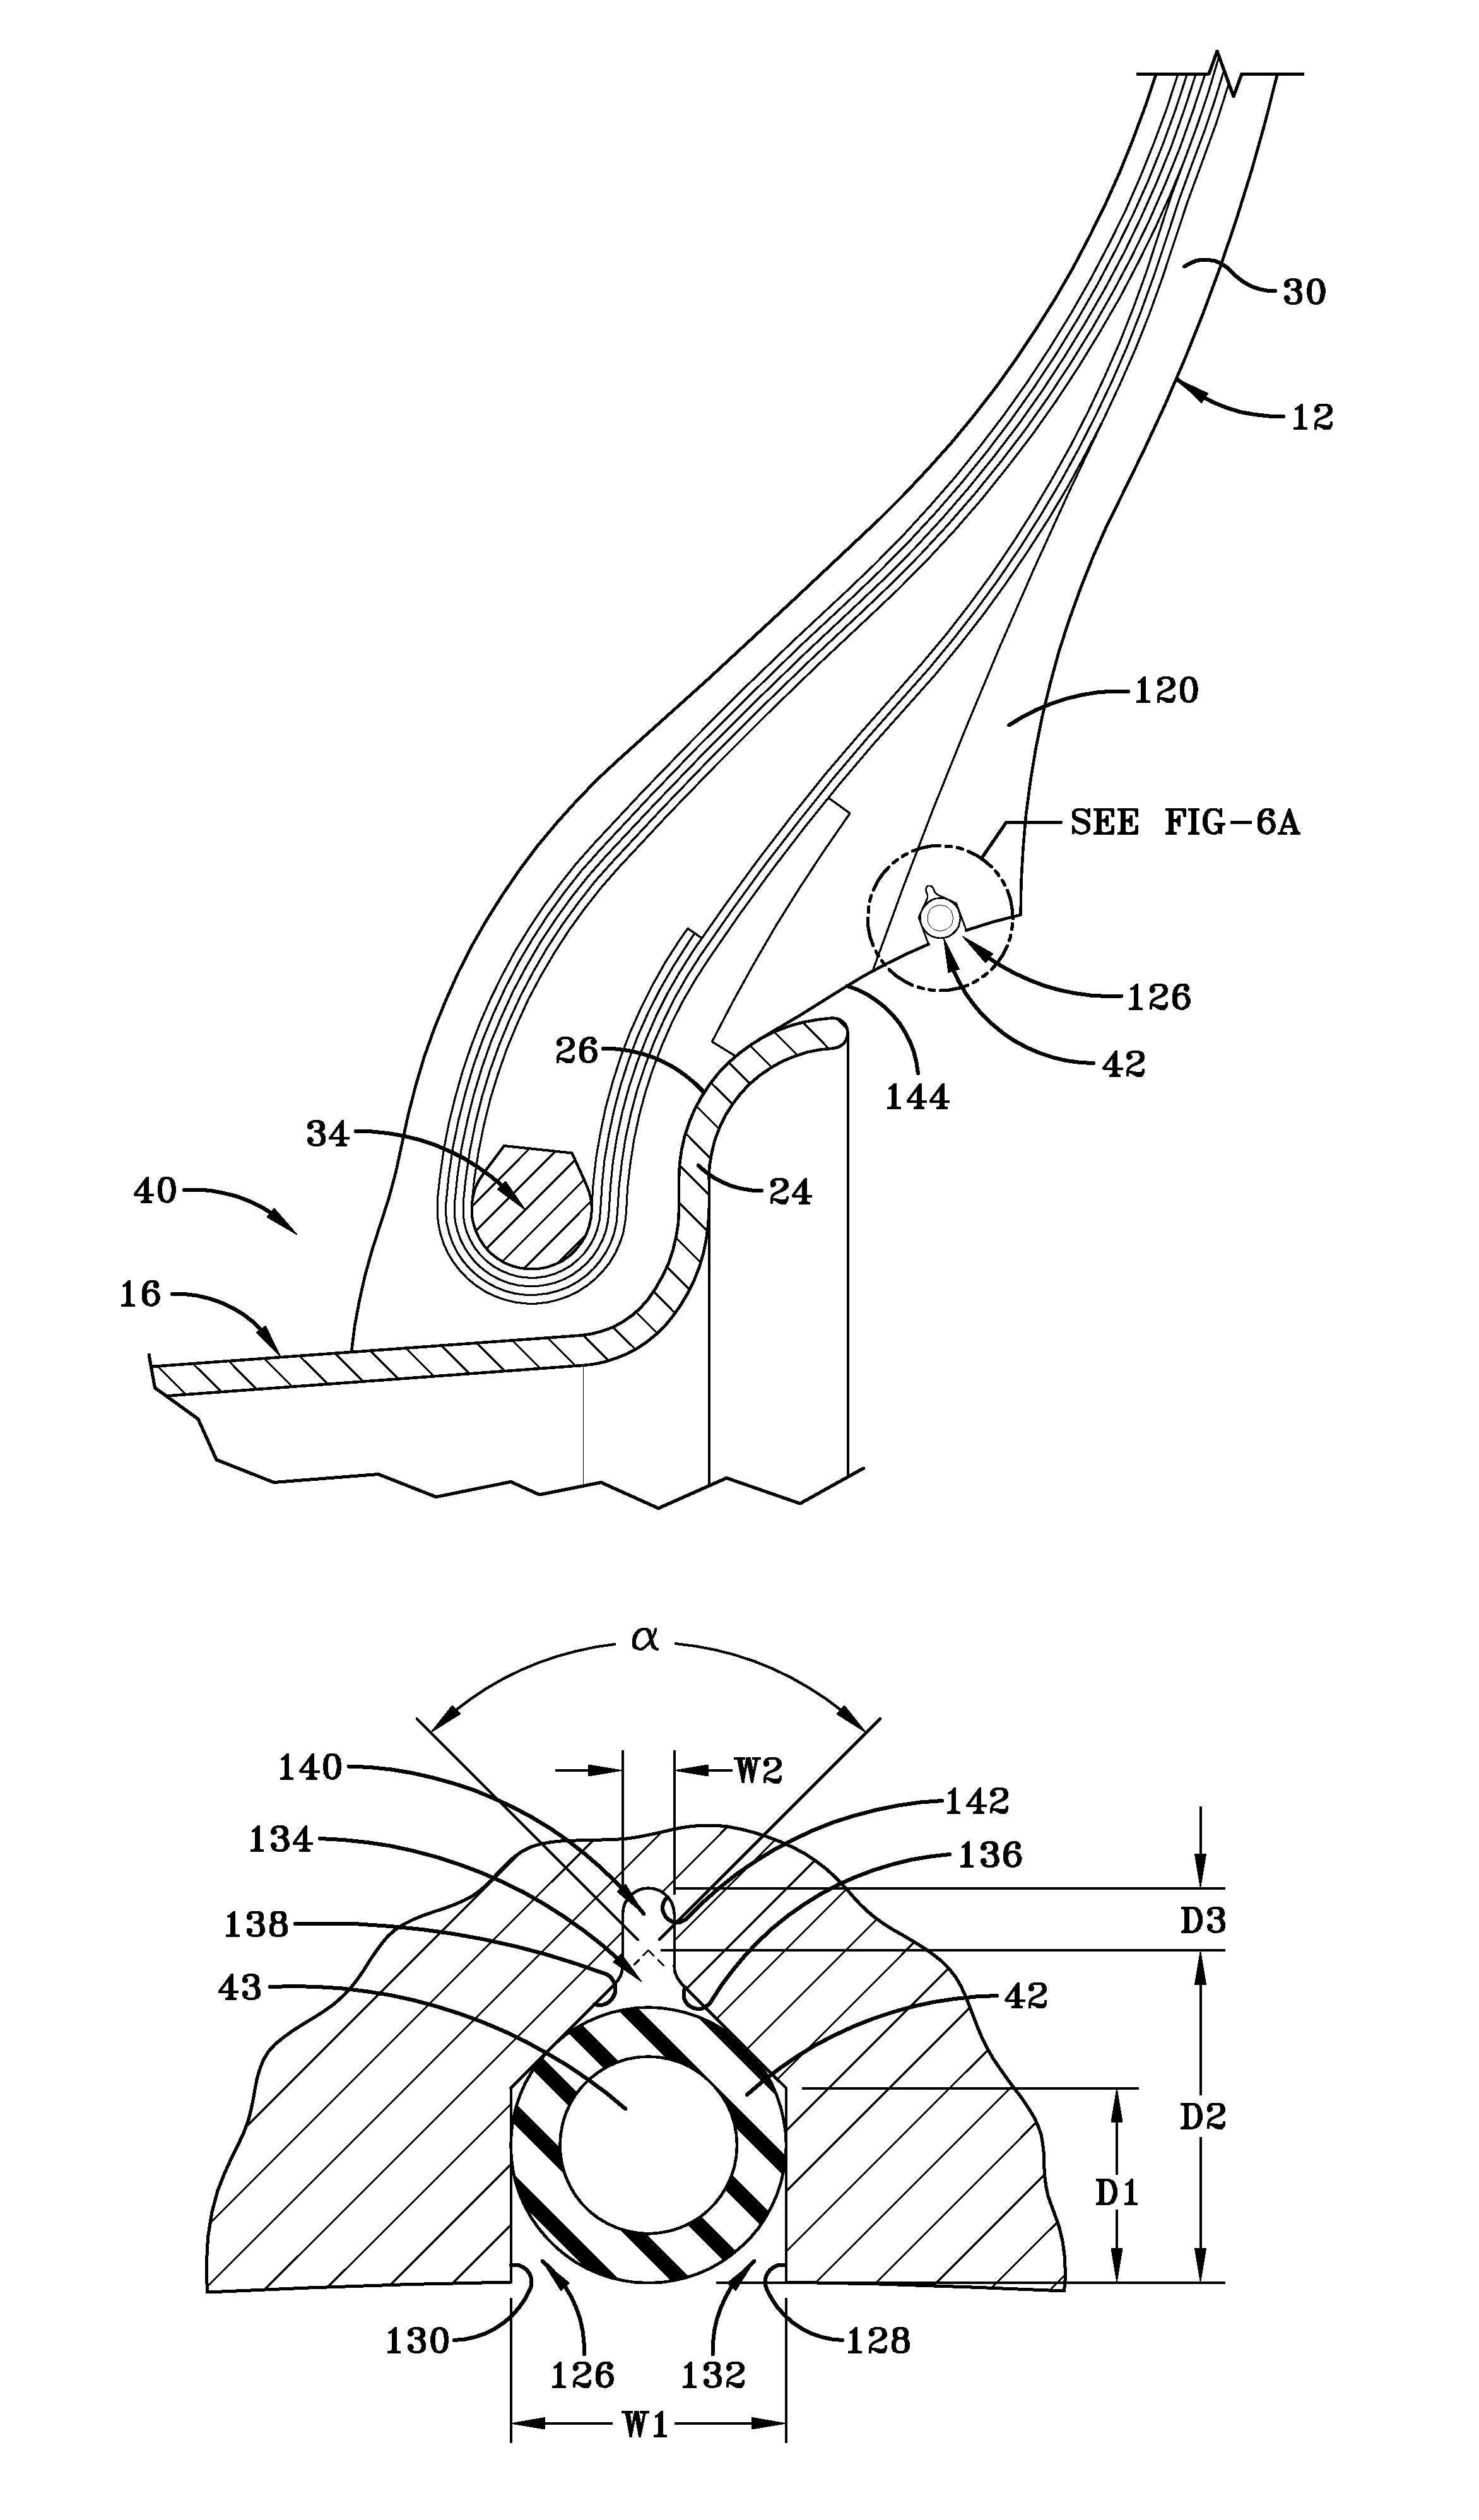 Self-inflating tire assembly